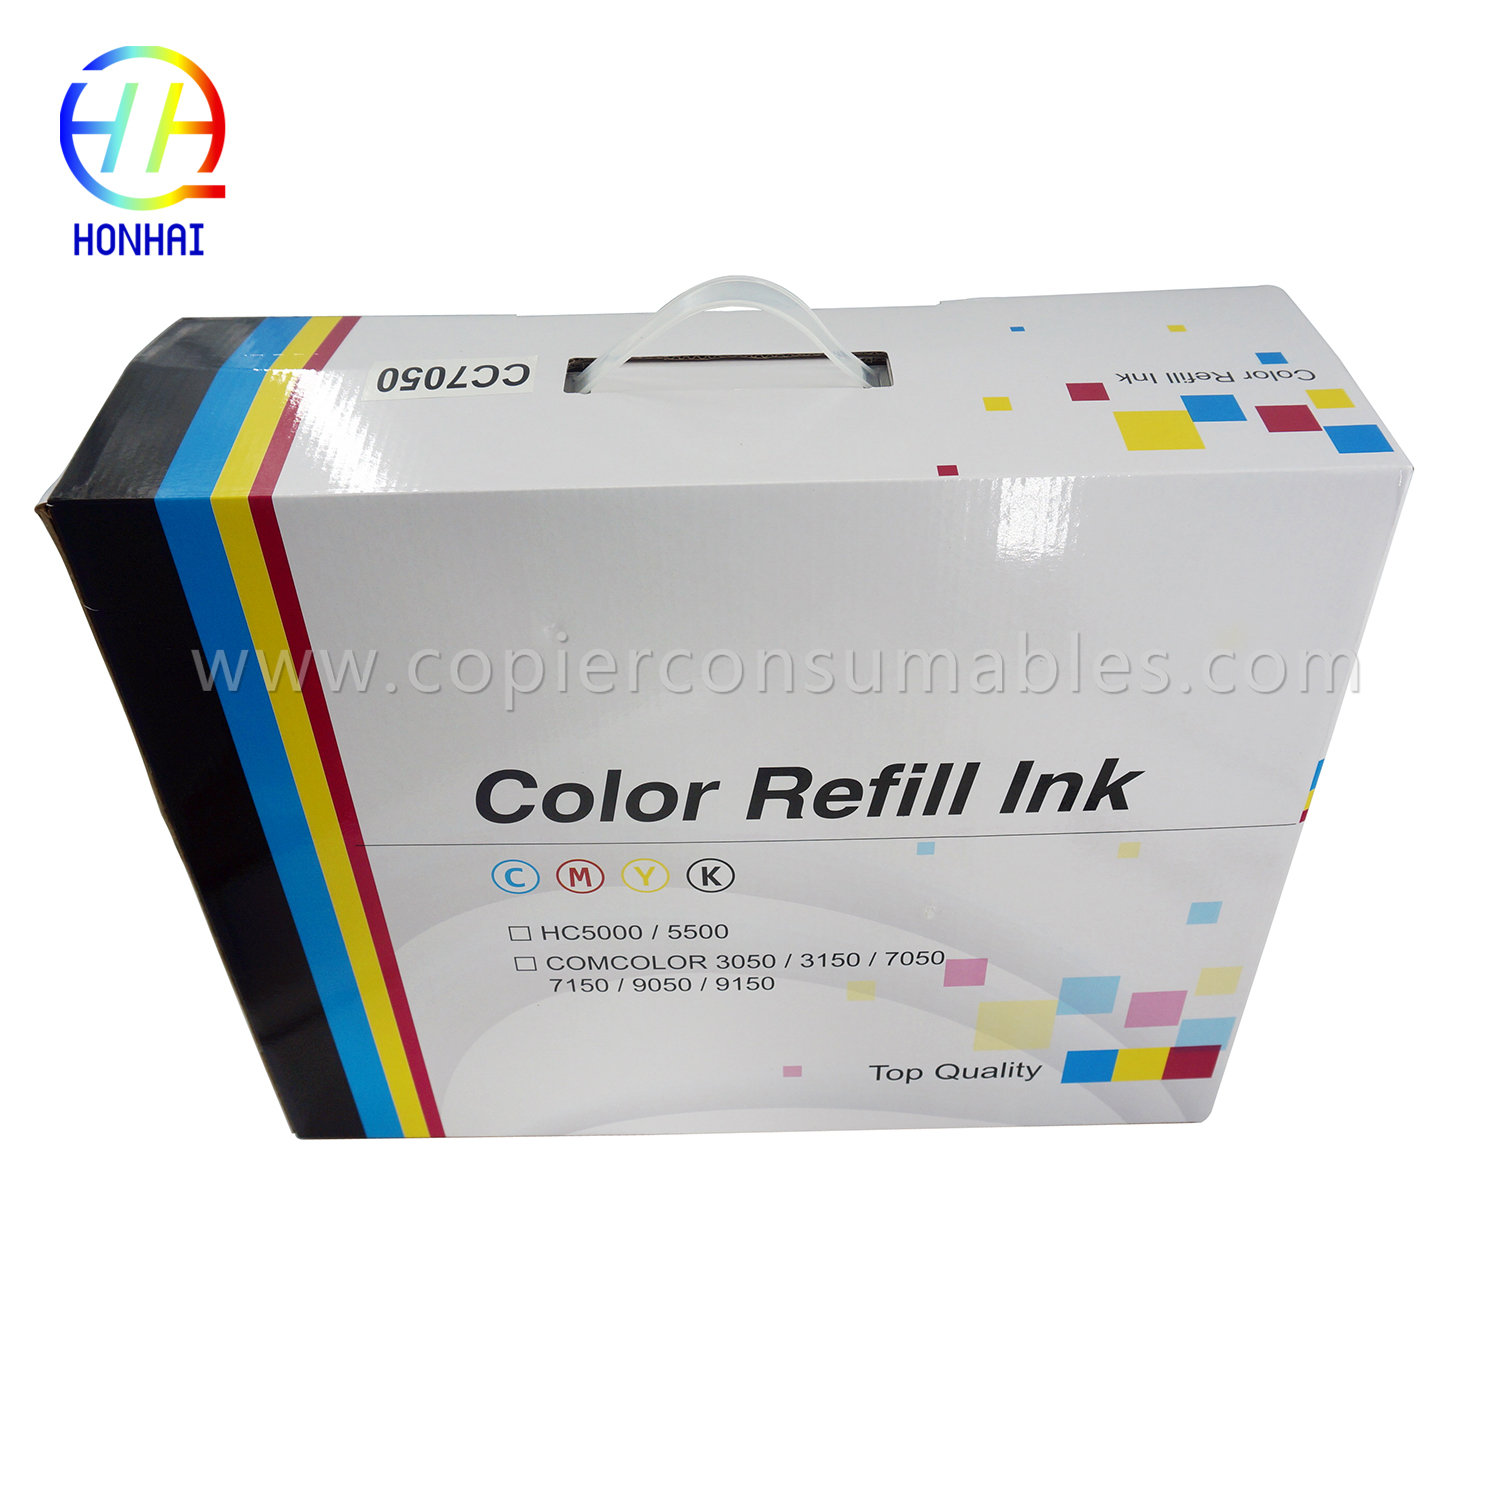 Pahu Inika Risograph ComColor 3010 3050 3150 7010 7050 7150 9050 9150 HC 5000 5500 (S-6300G S-6301G S-6302G S-6303G) (1)